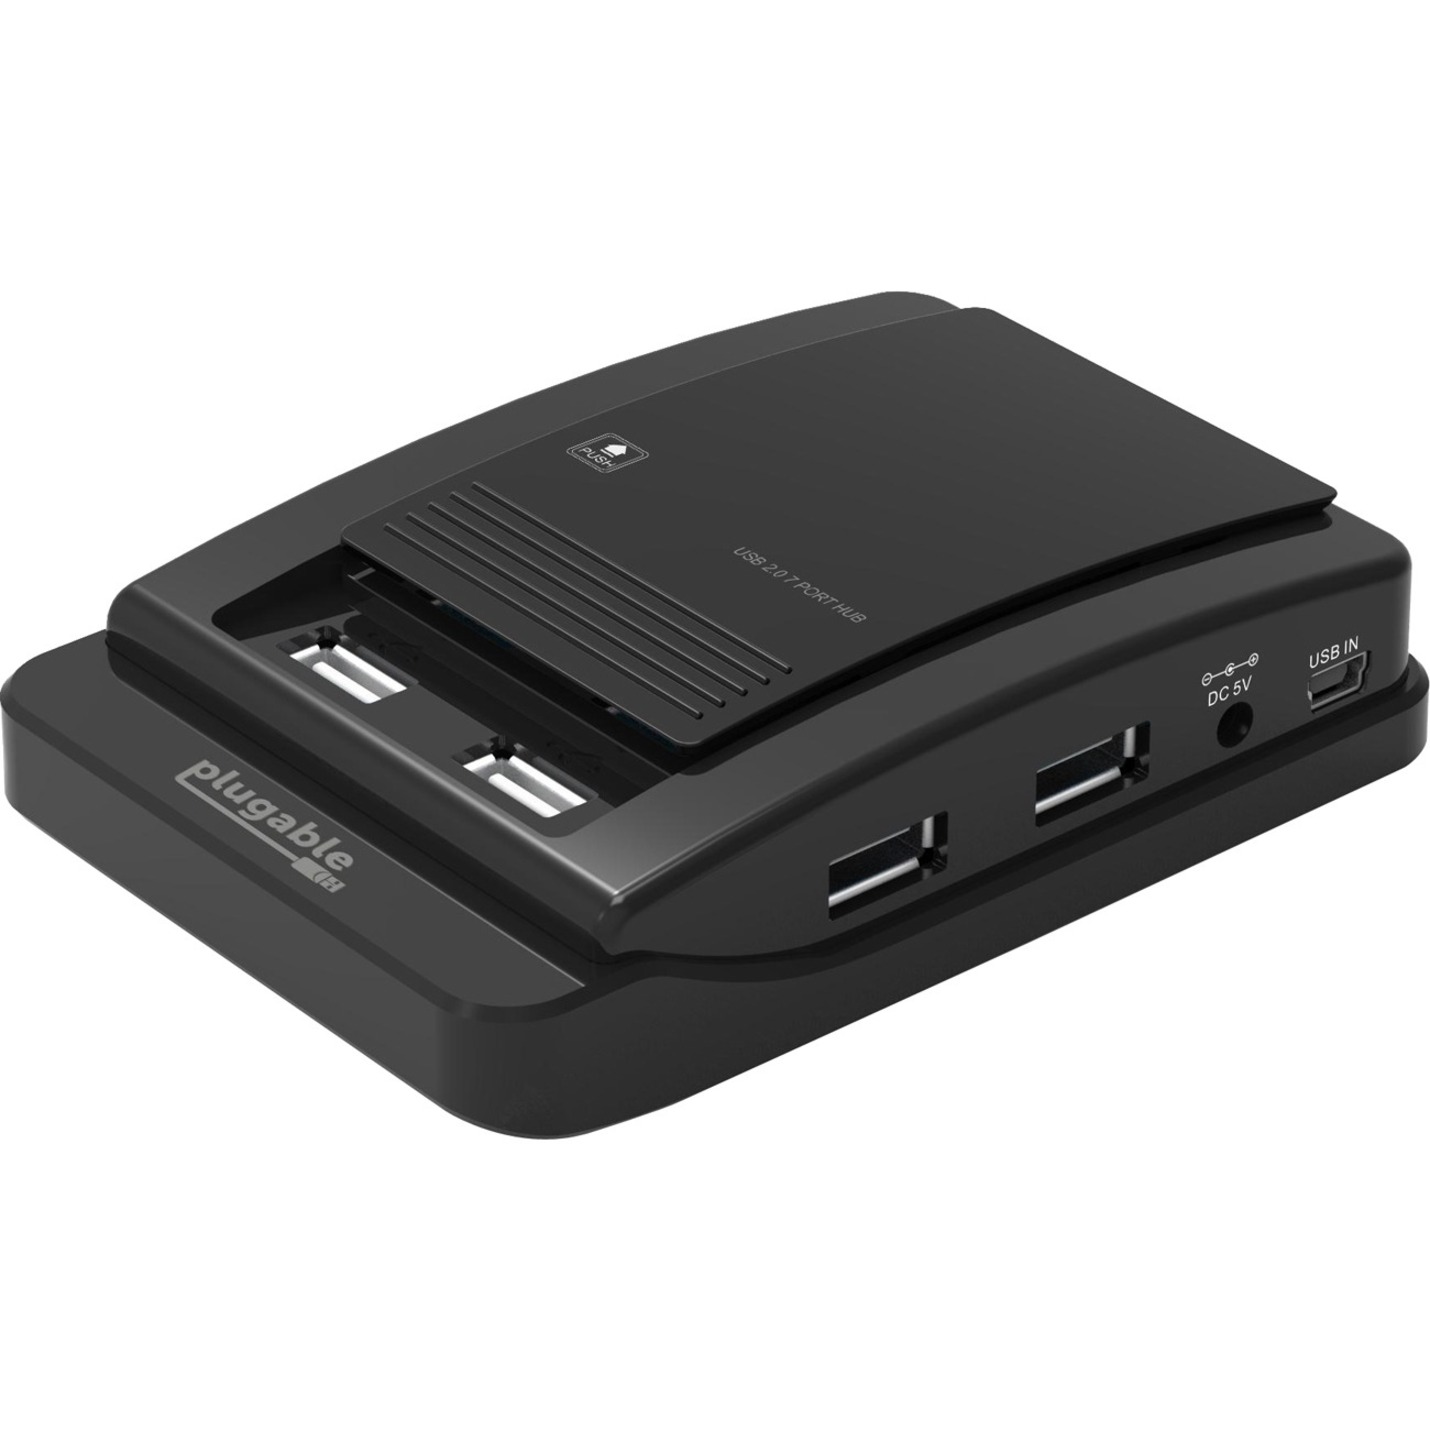 Plugable USB 2.0 7-Port High Speed Hub with 15W Power Adapter - image 1 of 7